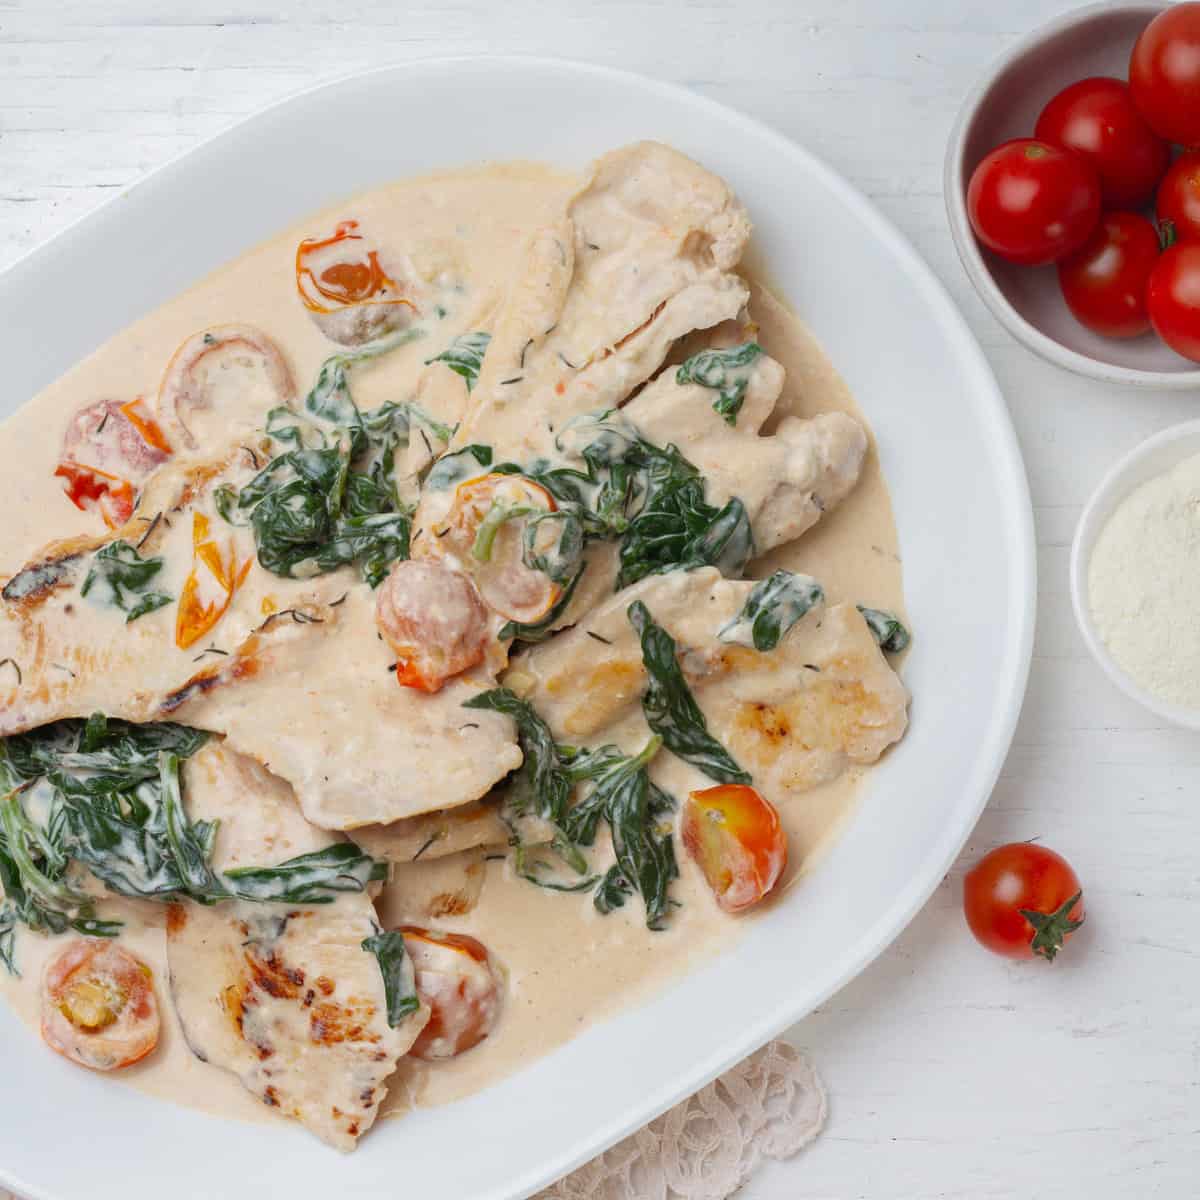 Creamy Weight Watchers Tuscan Chicken with spinach and cherry tomatoes.